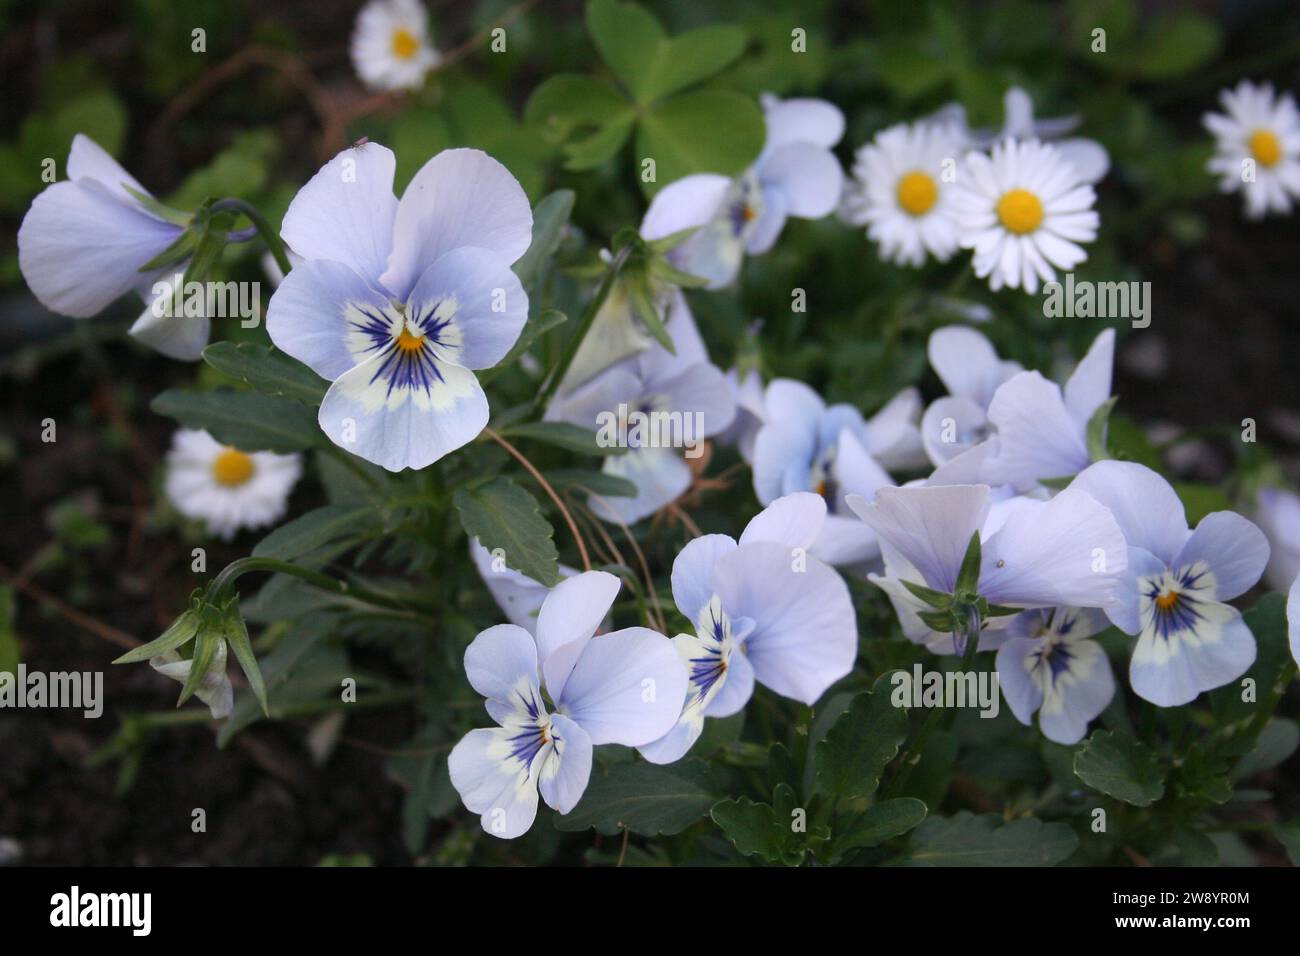 medium shot of a variety of flowers including a sky blue viola and traditional white garden daisy Stock Photo